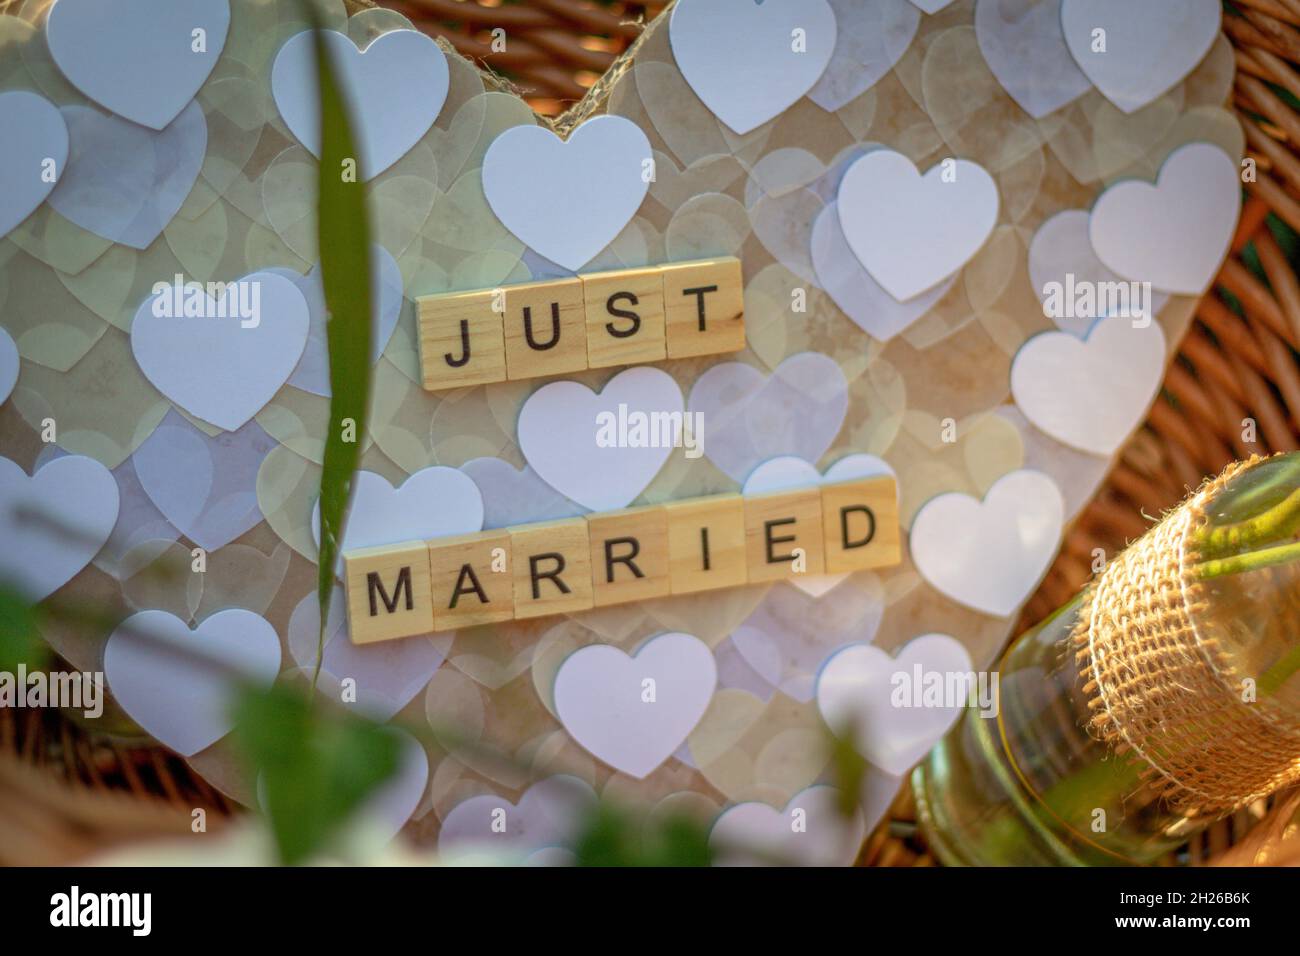 a heart with the words Just married made of single wooden letters in a basket as decoration at wedding celebration Stock Photo